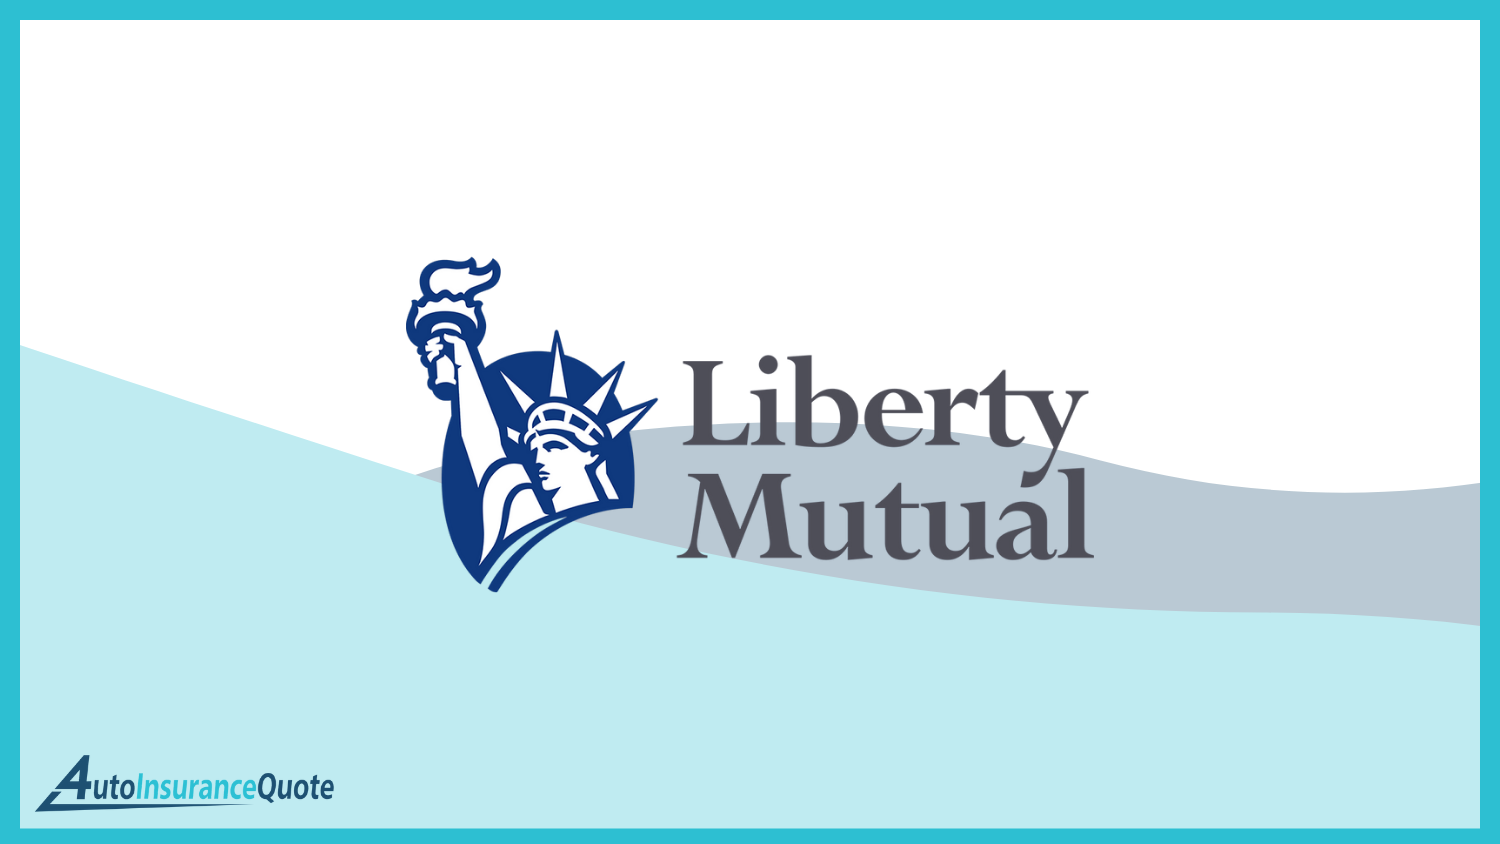 Liberty Mutual: Best Auto Insurance for College Graduates